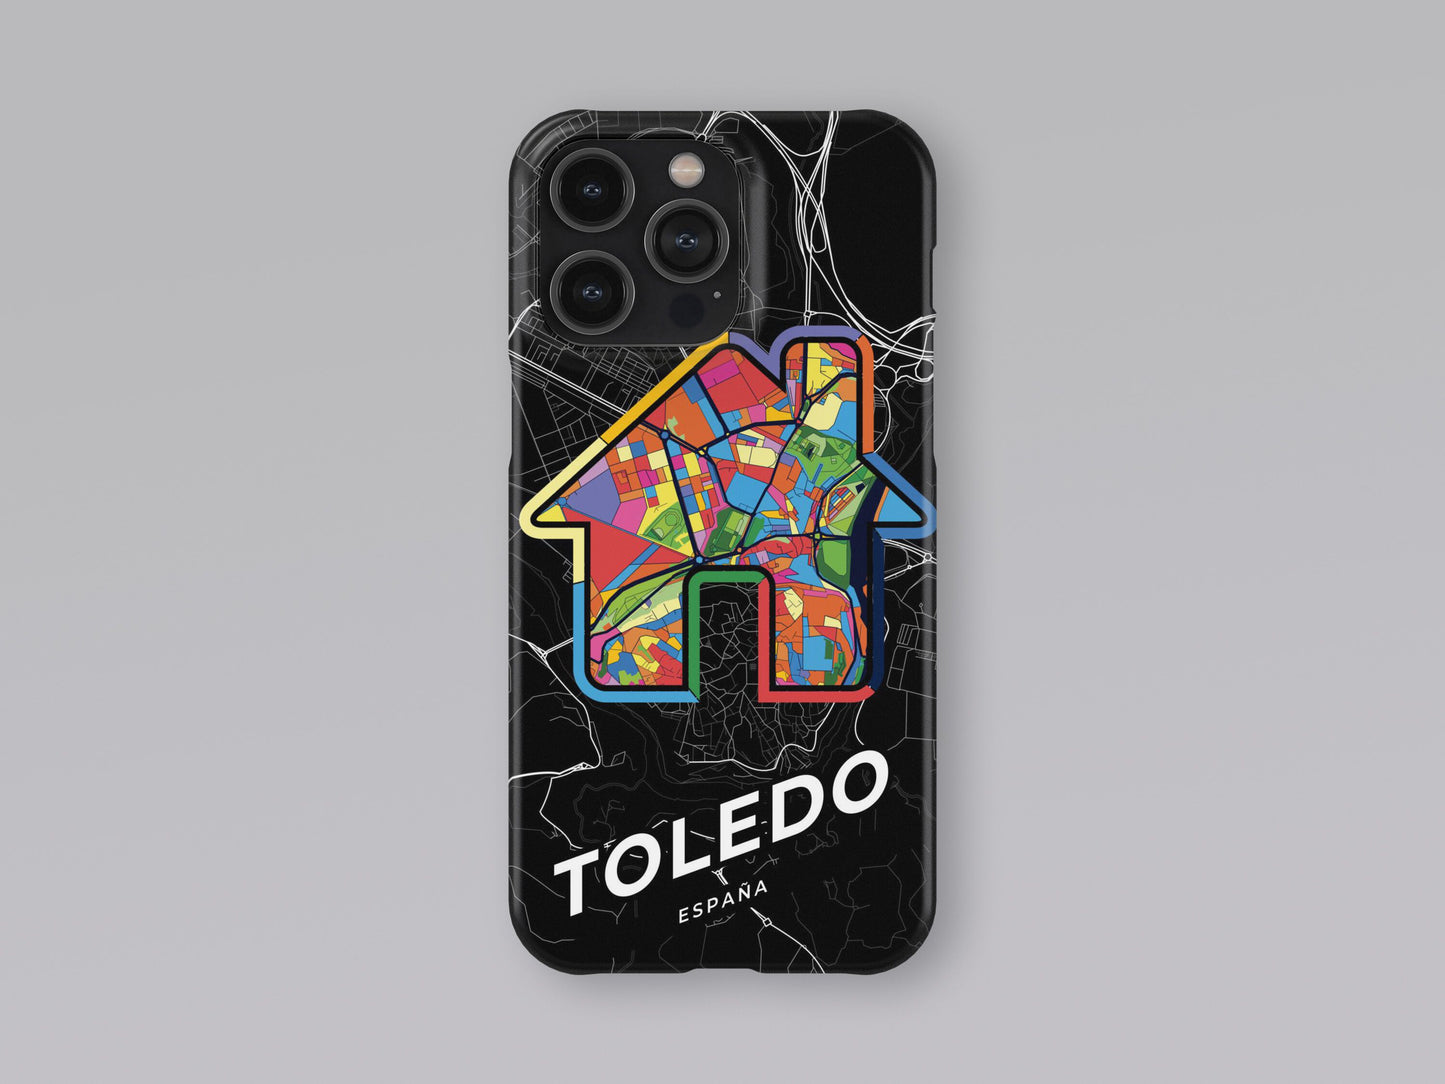 Toledo Spain slim phone case with colorful icon 3